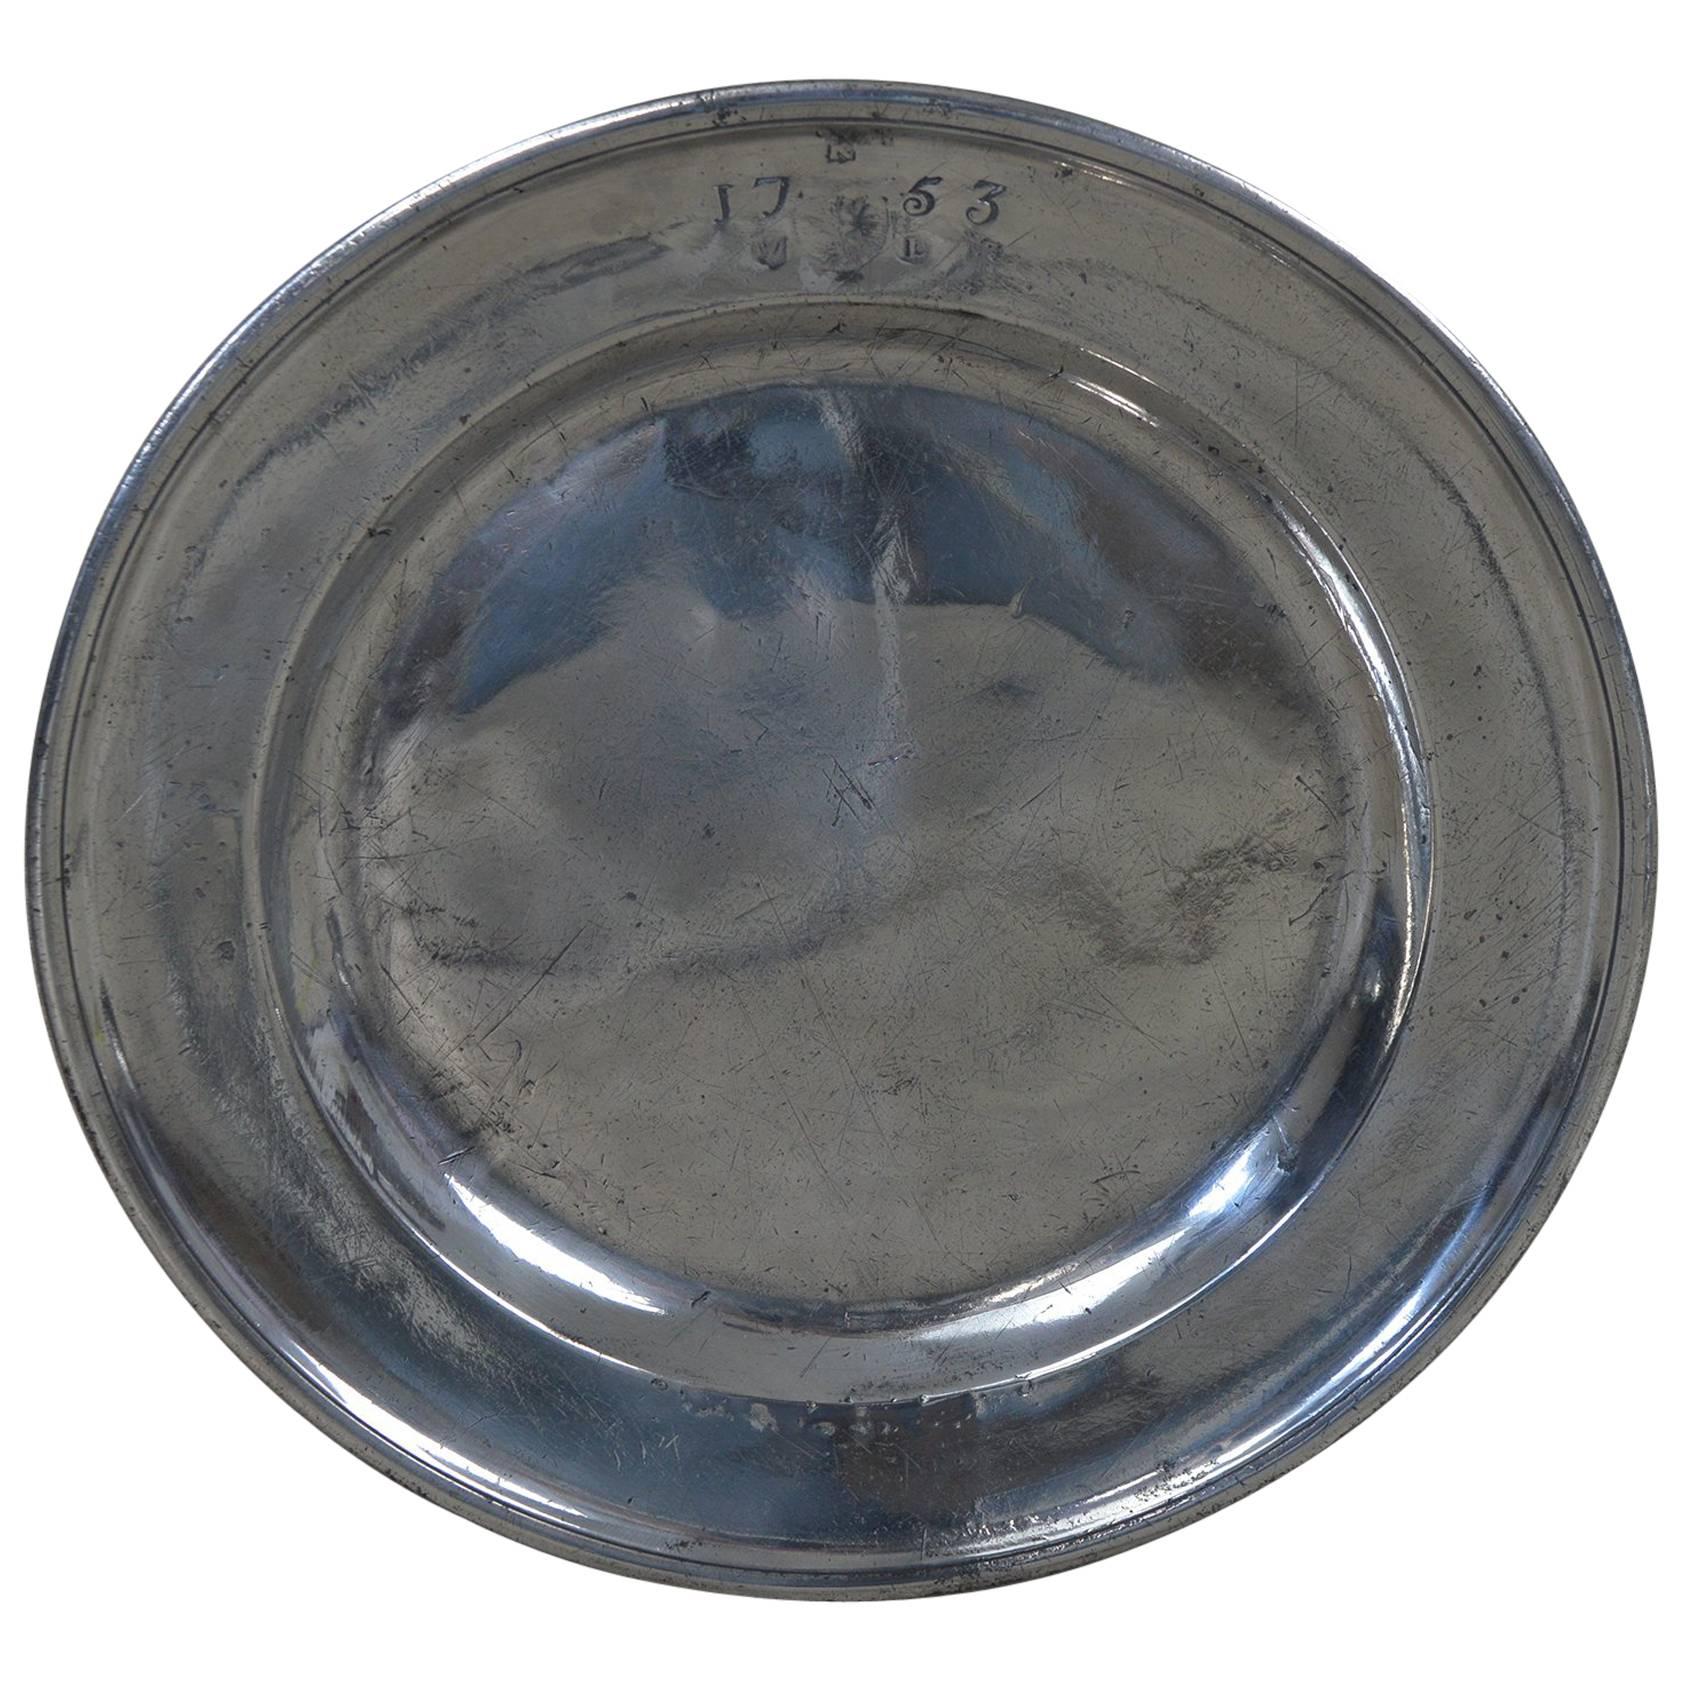 Large Antique Polished Pewter Charger or Tray, English, Dated 1753